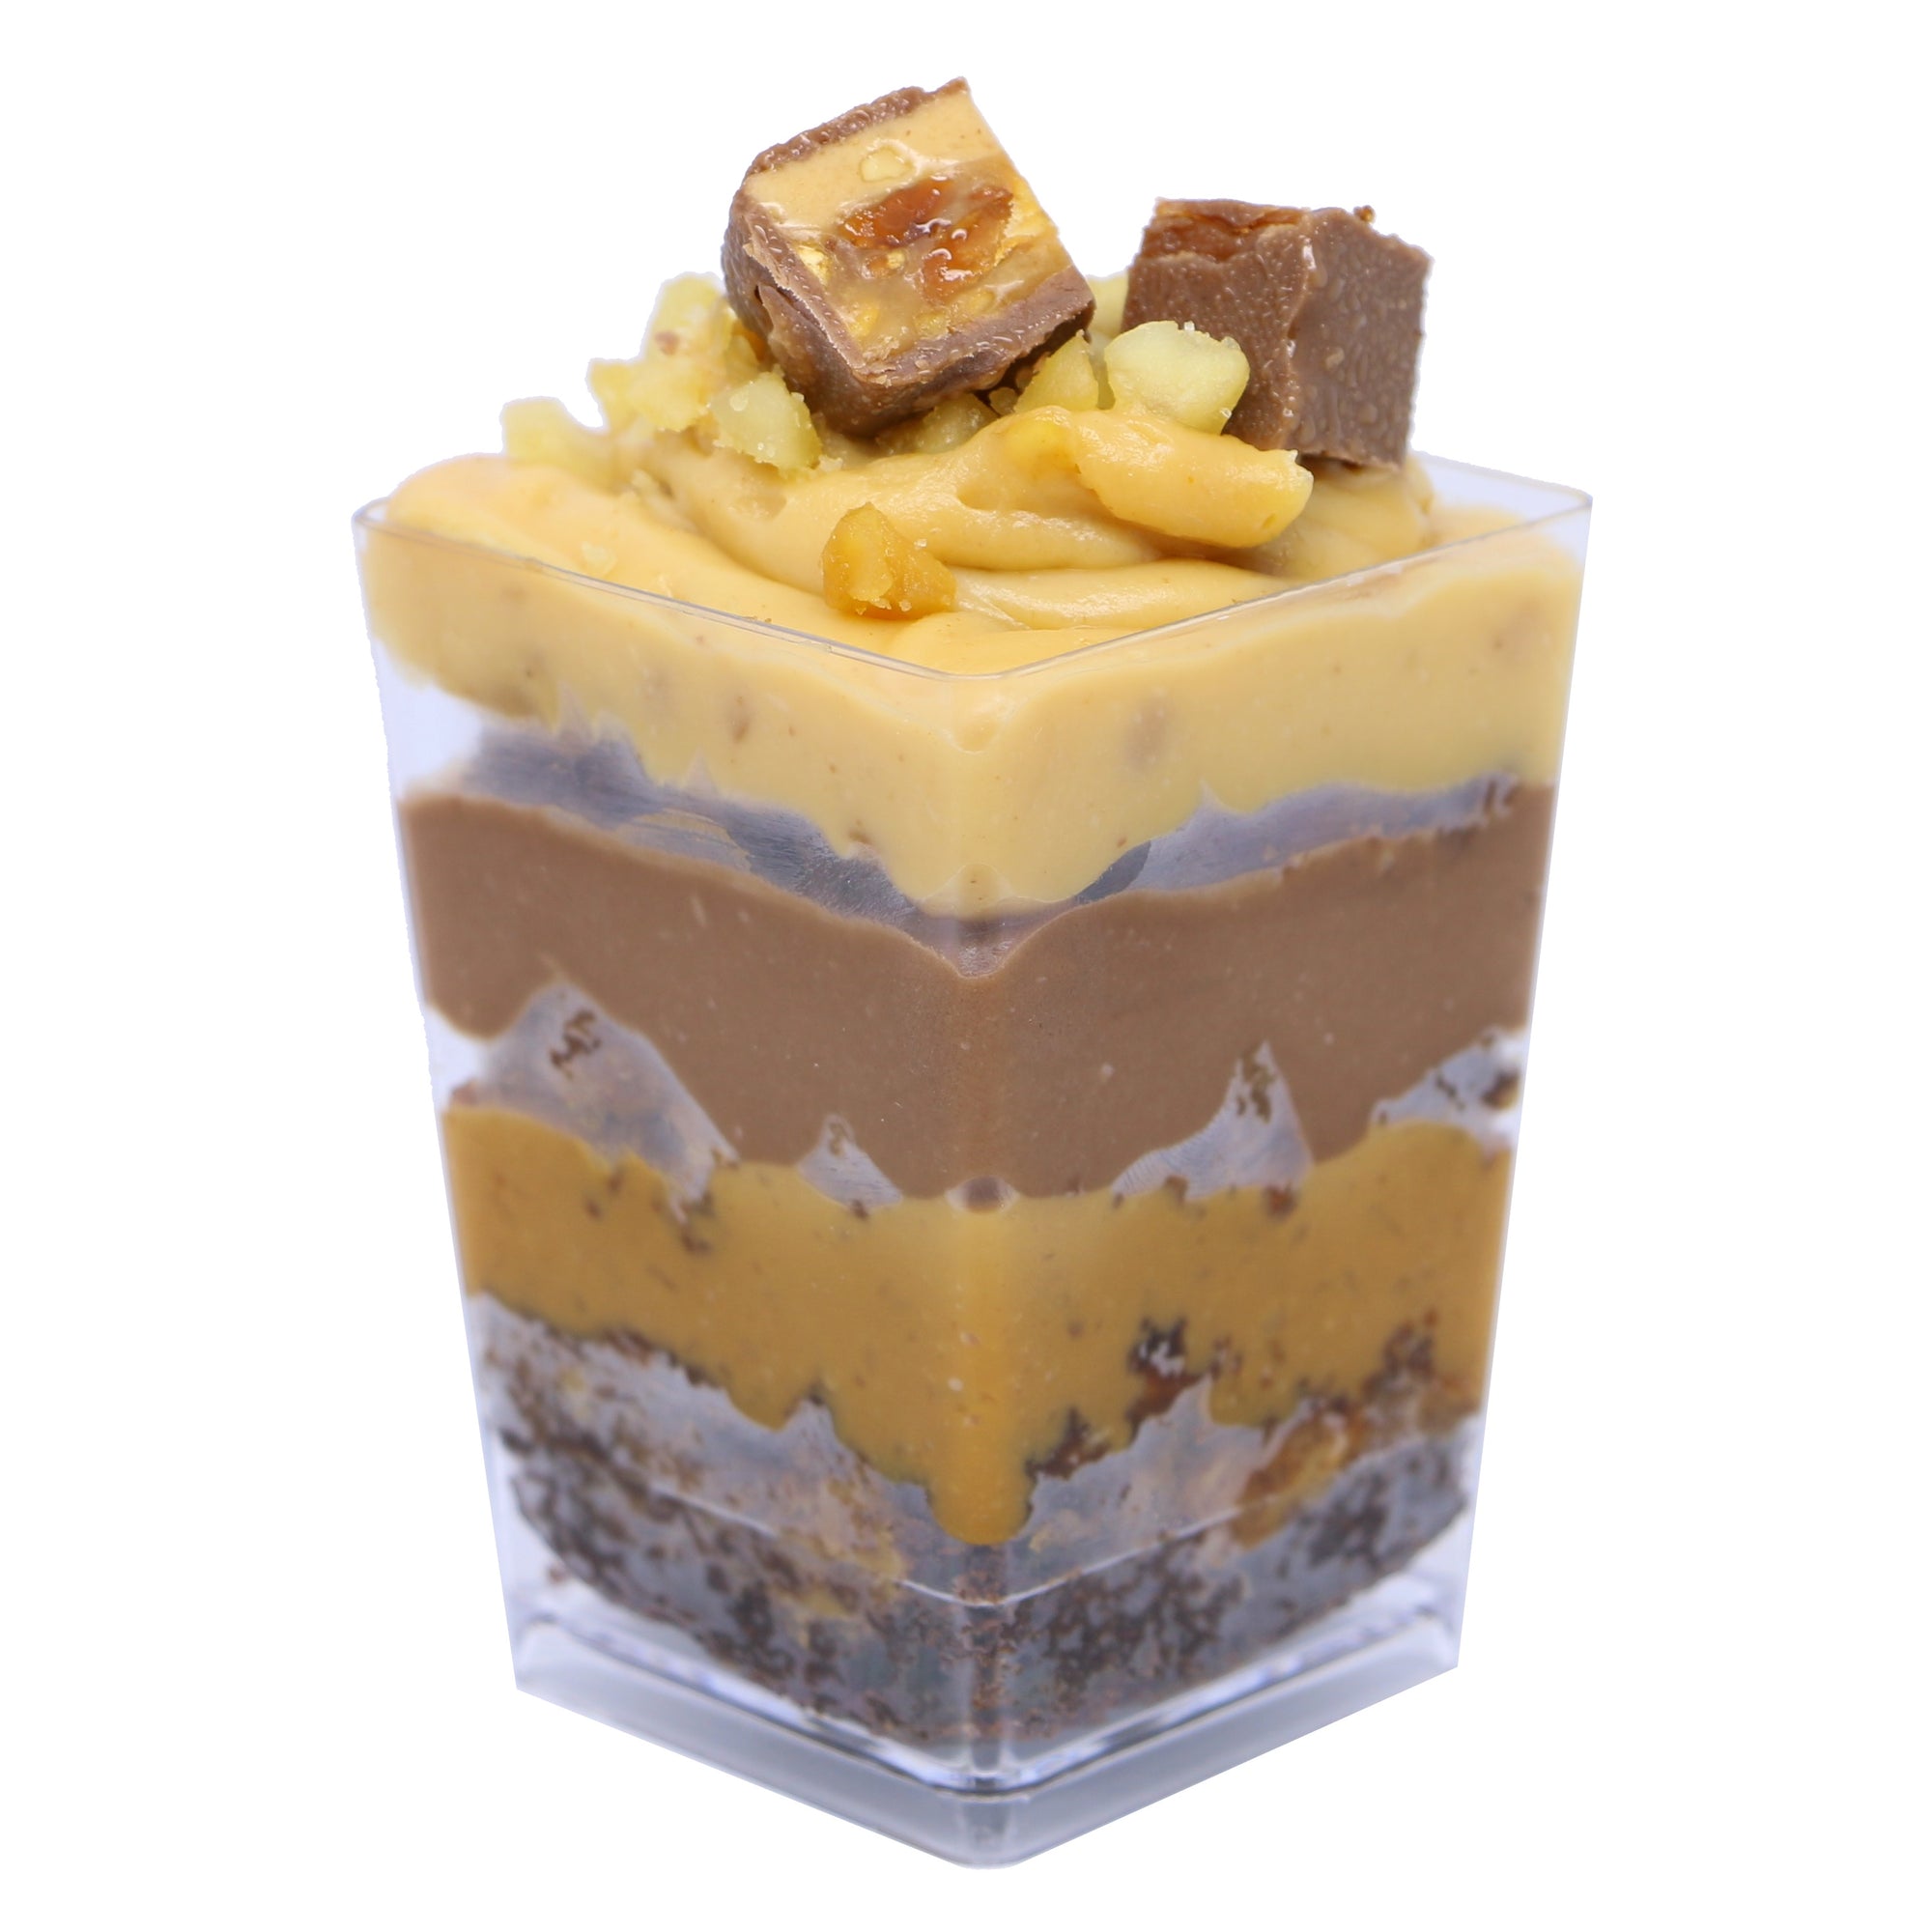 Dessert Cup - Snickers - Treats2eat - Wedding & Birthday Party Dessert Catering Near Me